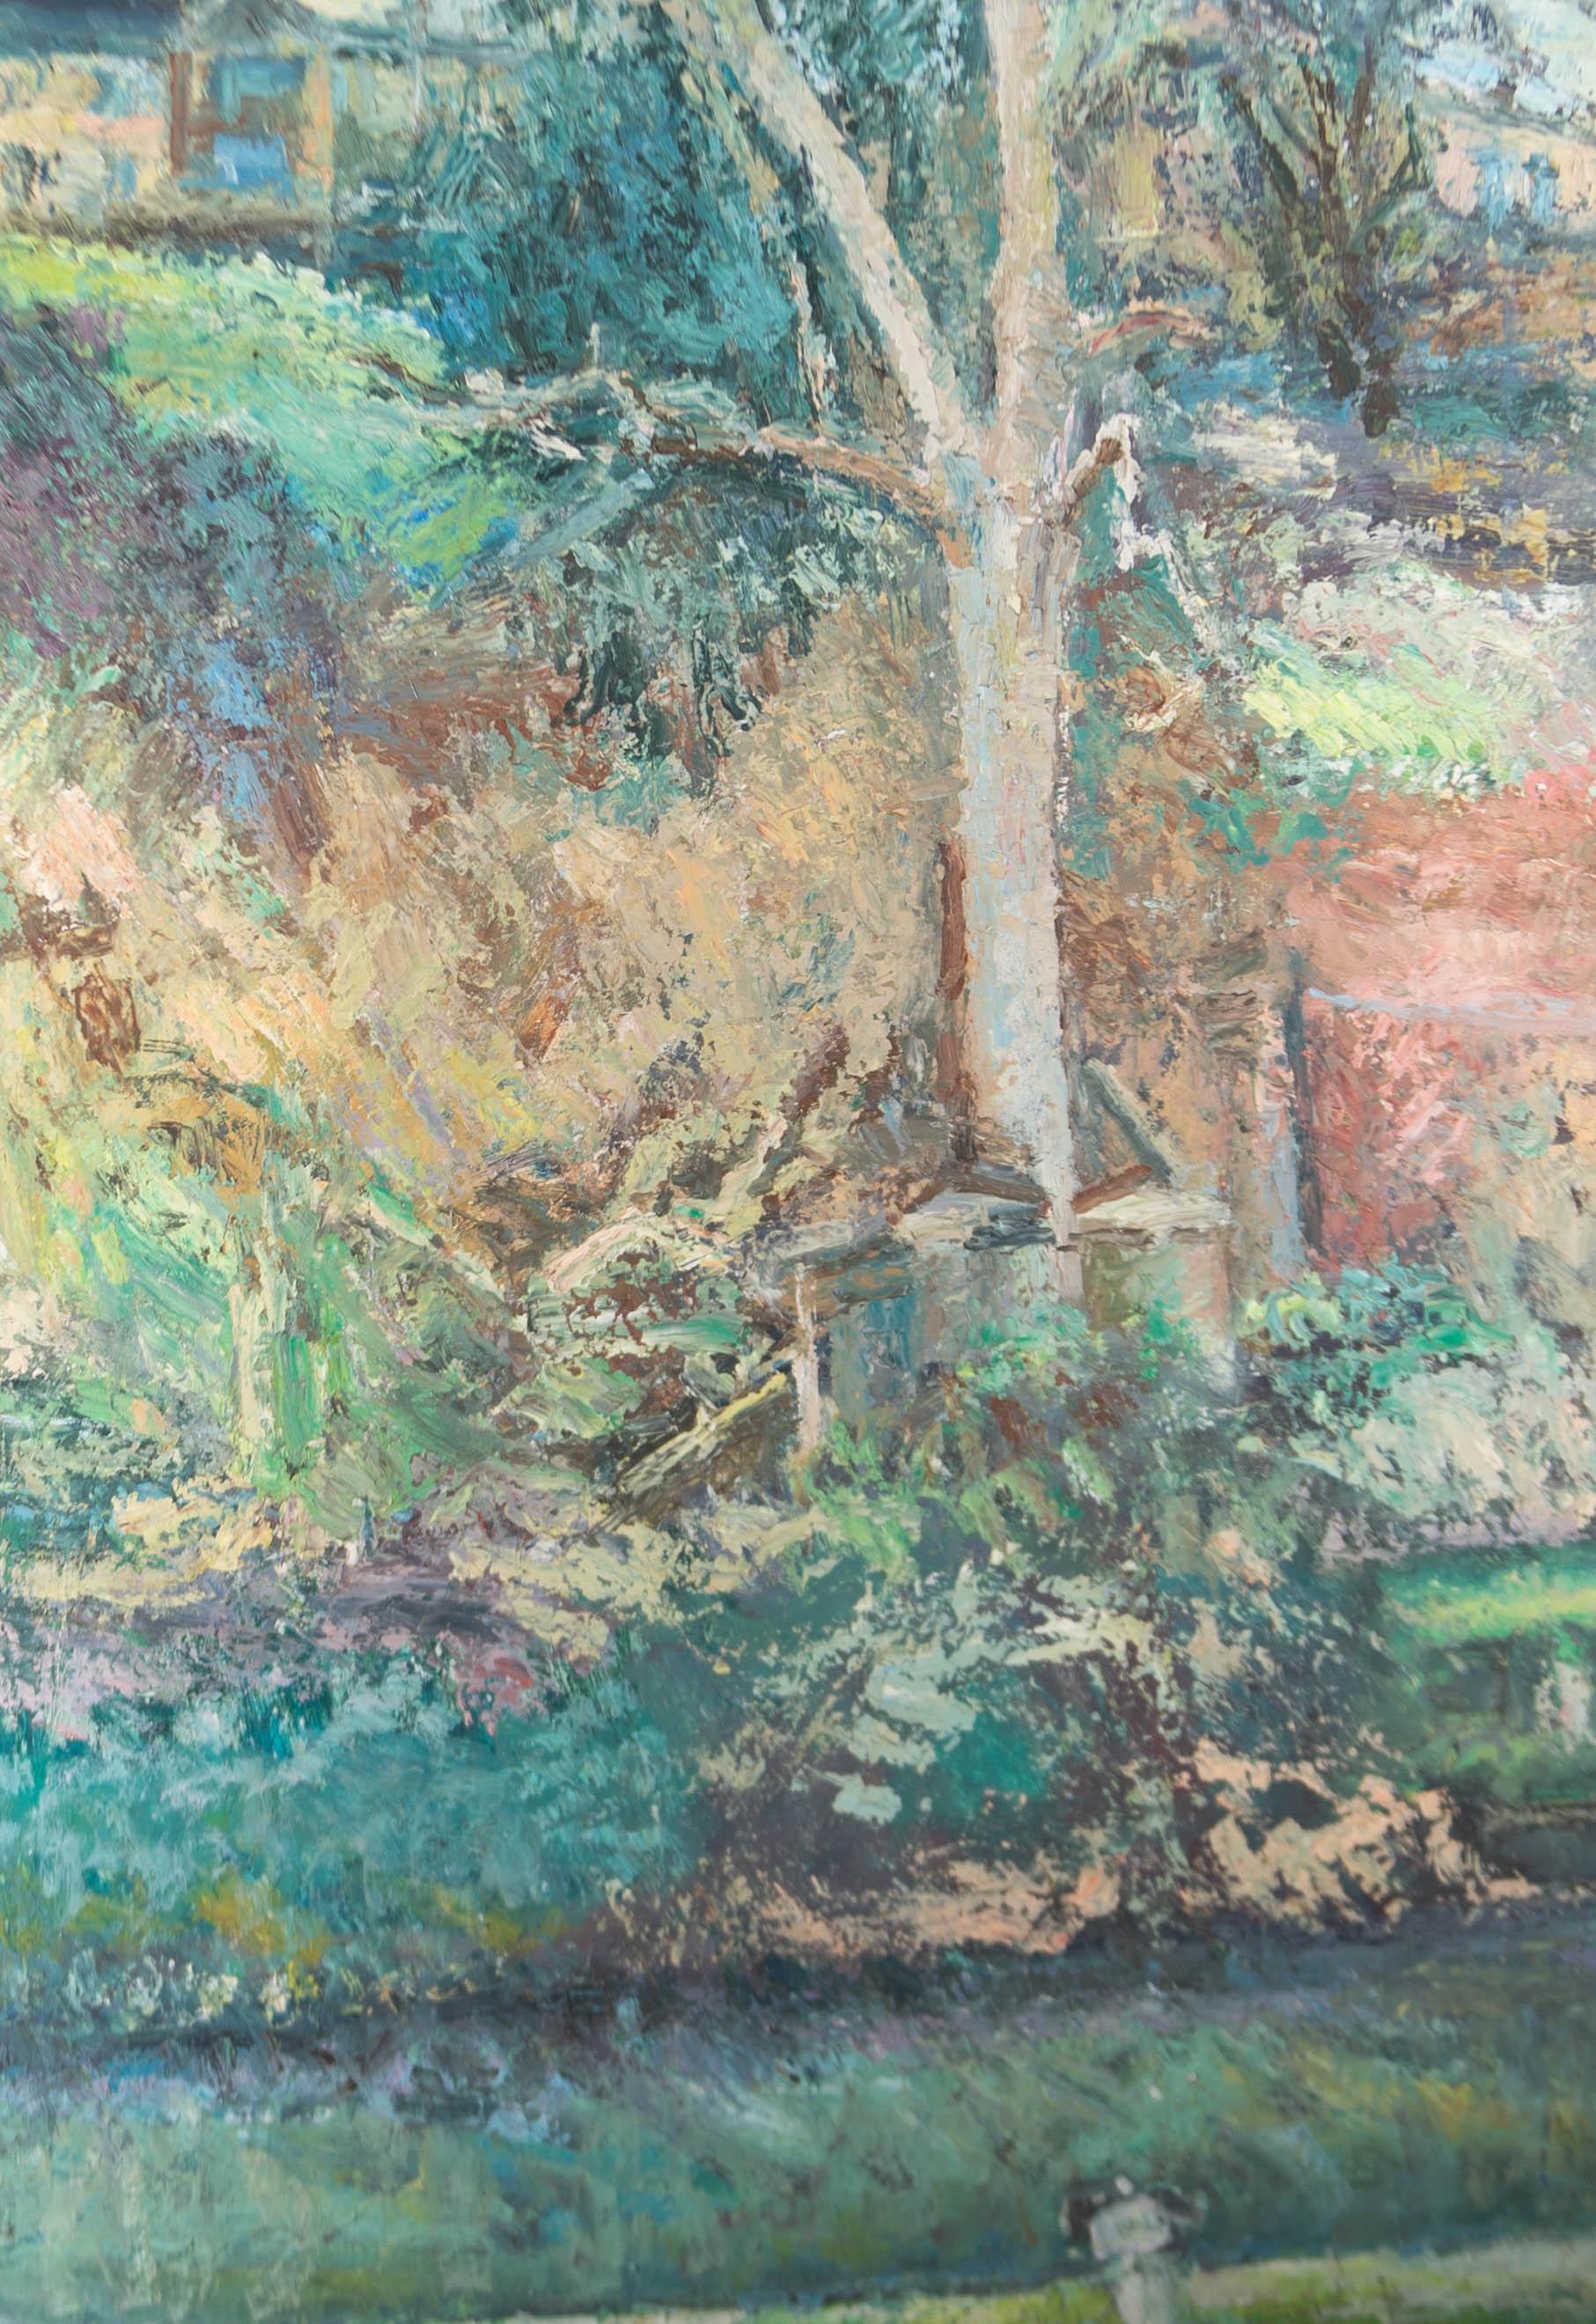 An impressionistic woodland scene is captured through the vigorous application of earthy green tones in thick impastos. The artwork has been finished to an honest and peaceful effect, truly capturing the subtleties of a springtime Forest. The